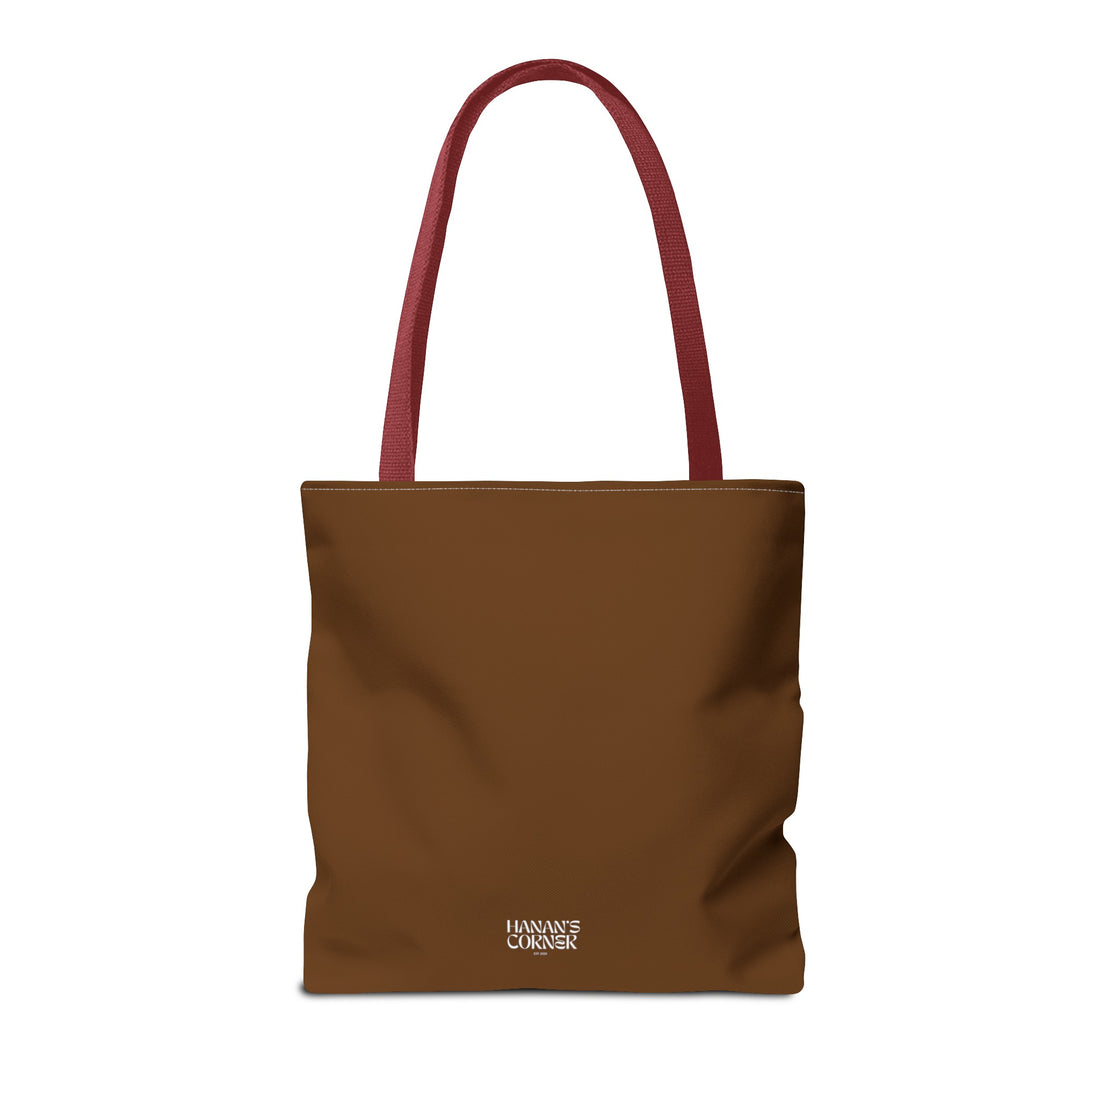 What is Todays Topic? - Revolution - Tote Bag